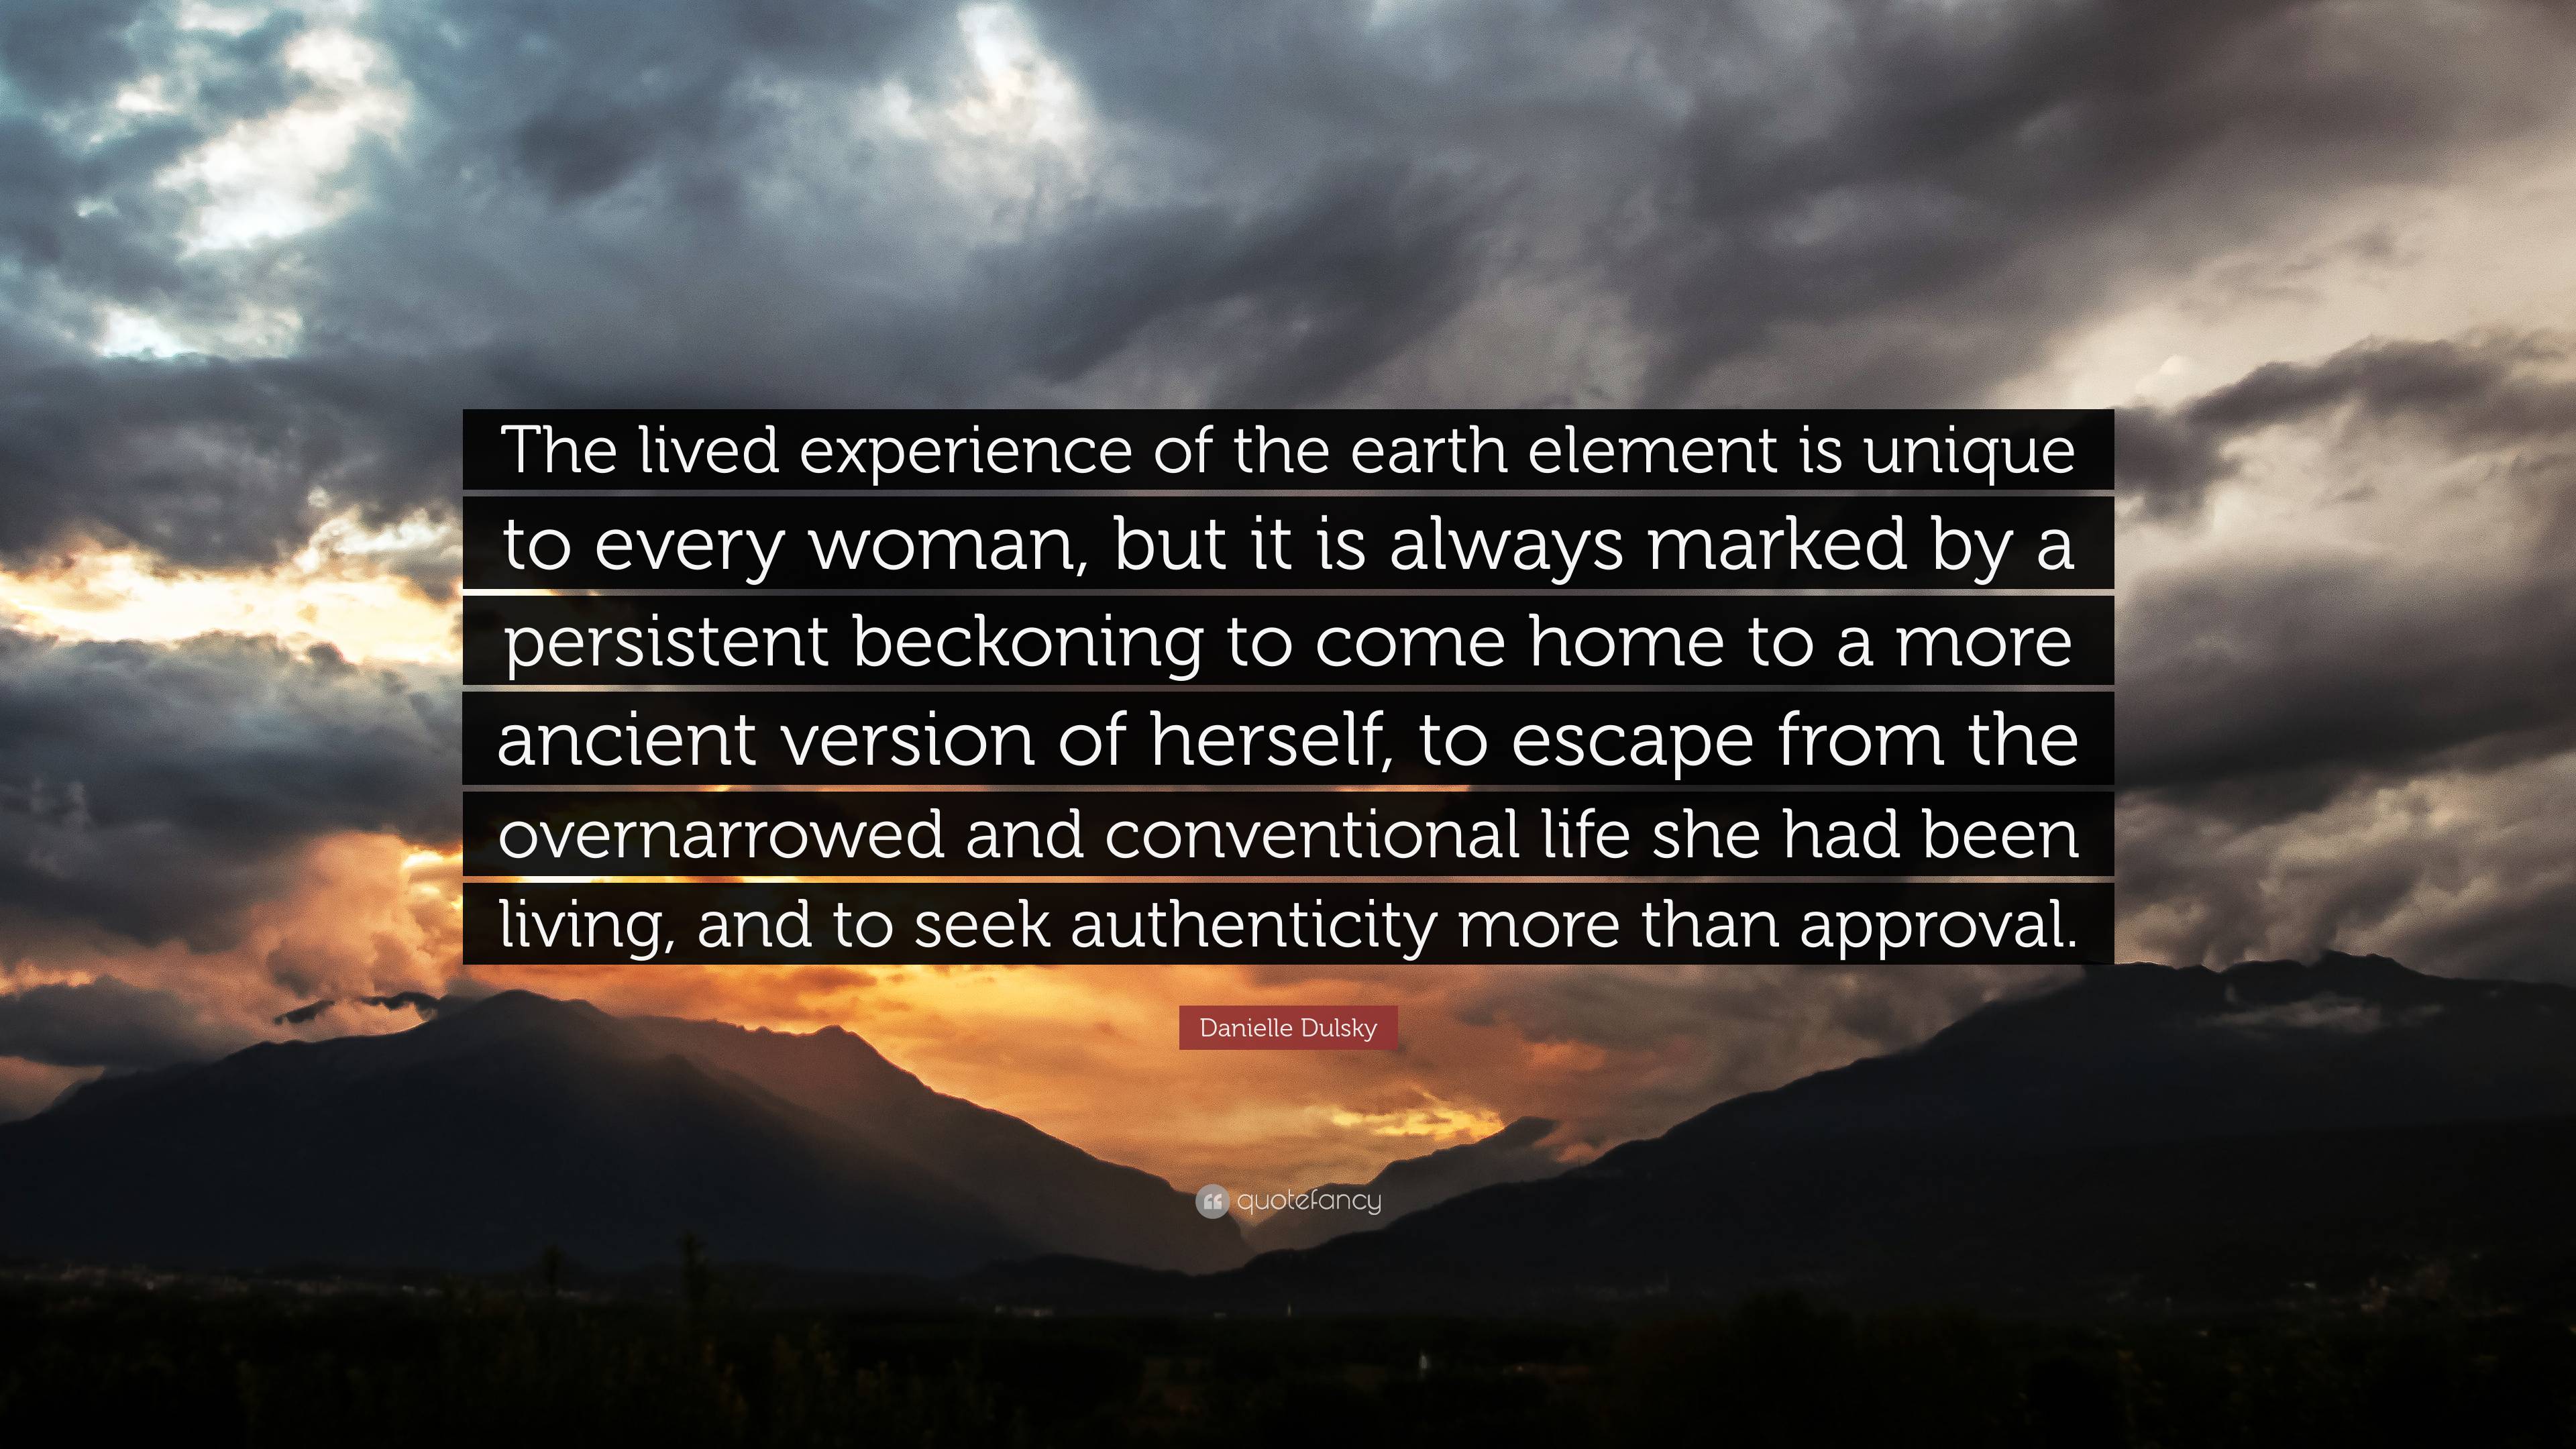 Danielle Dulsky Quote: “The lived experience of the earth element is ...